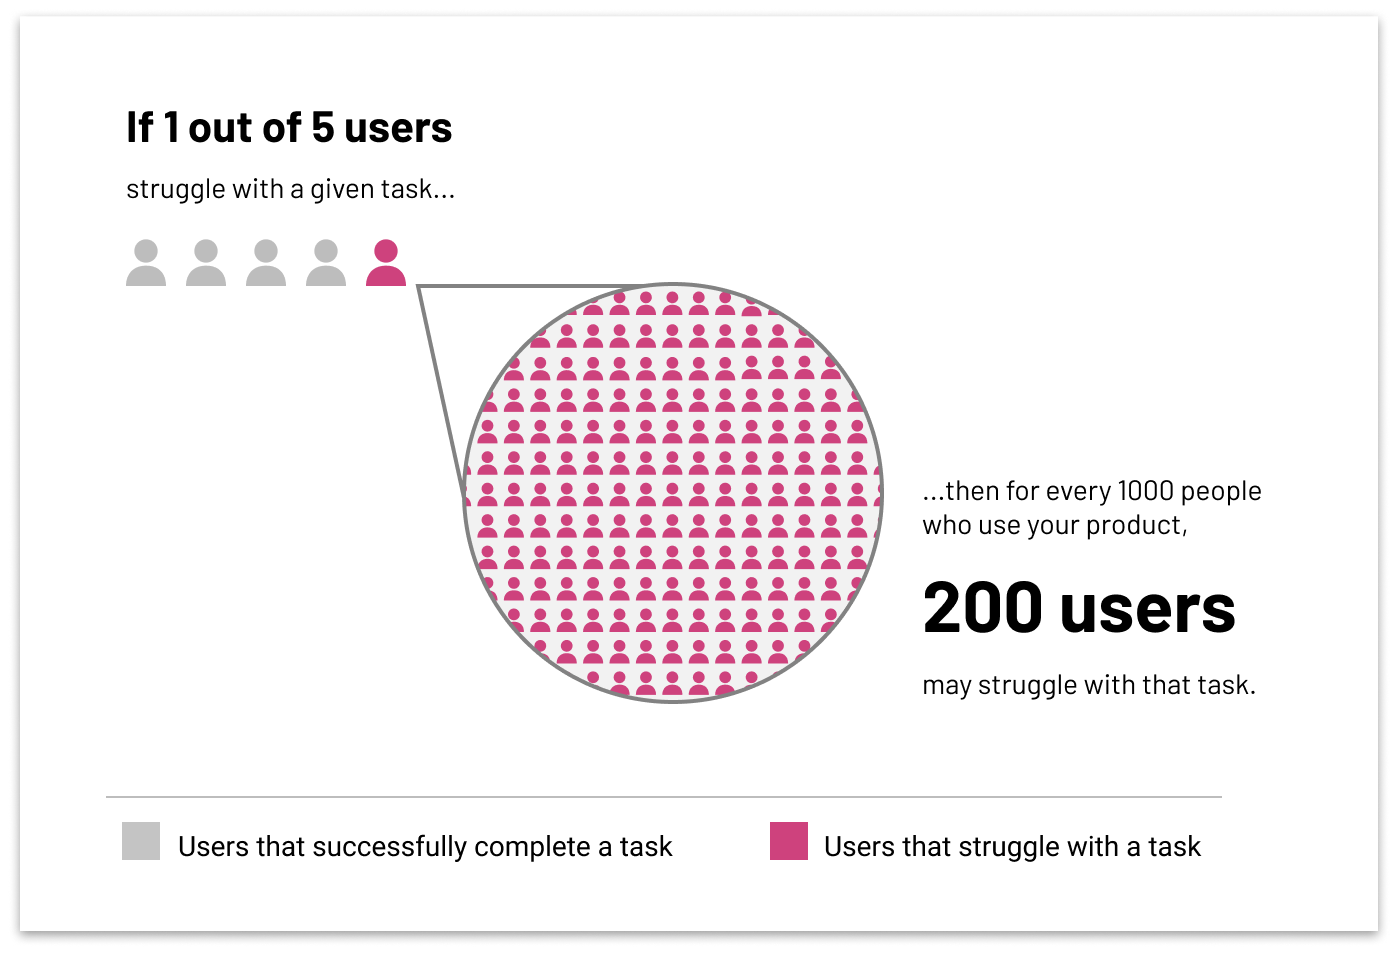 Diagram showing how just 1 in 5 users struggling with a task might scale to 200 users struggling out of every 1,000.